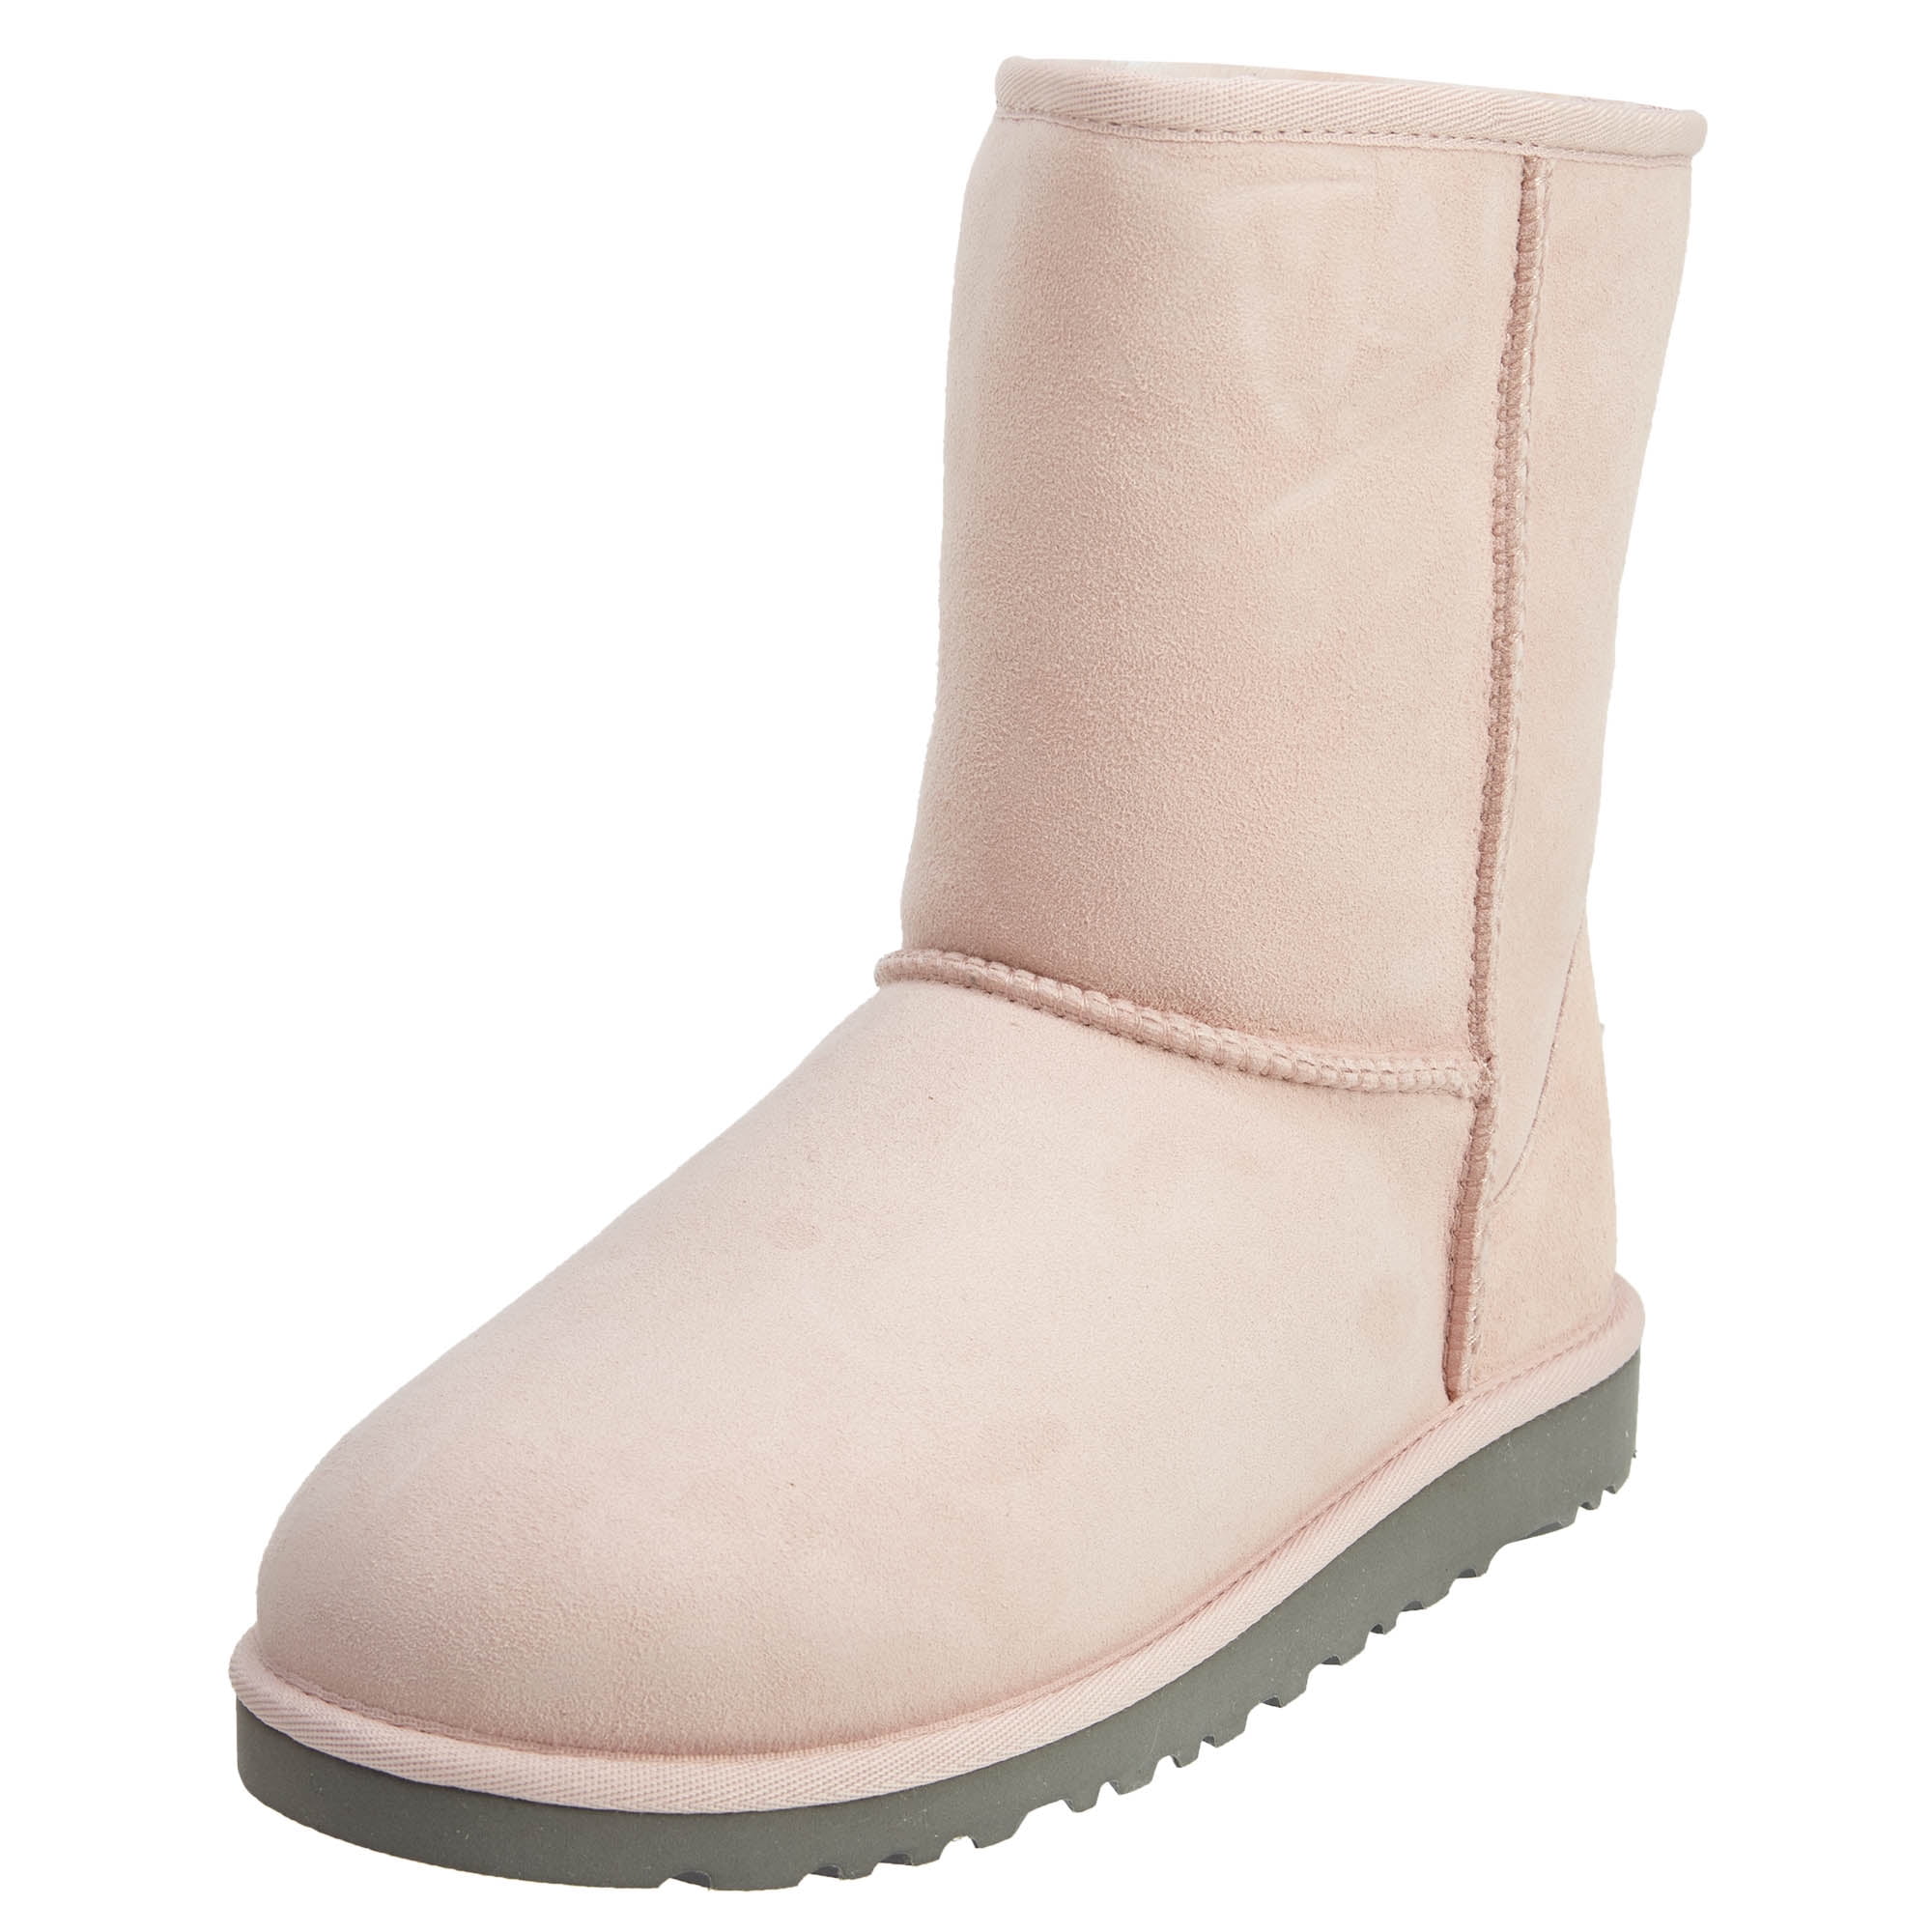 UGG - Ugg Classic Short Boots Big Kids Style : 5251Y